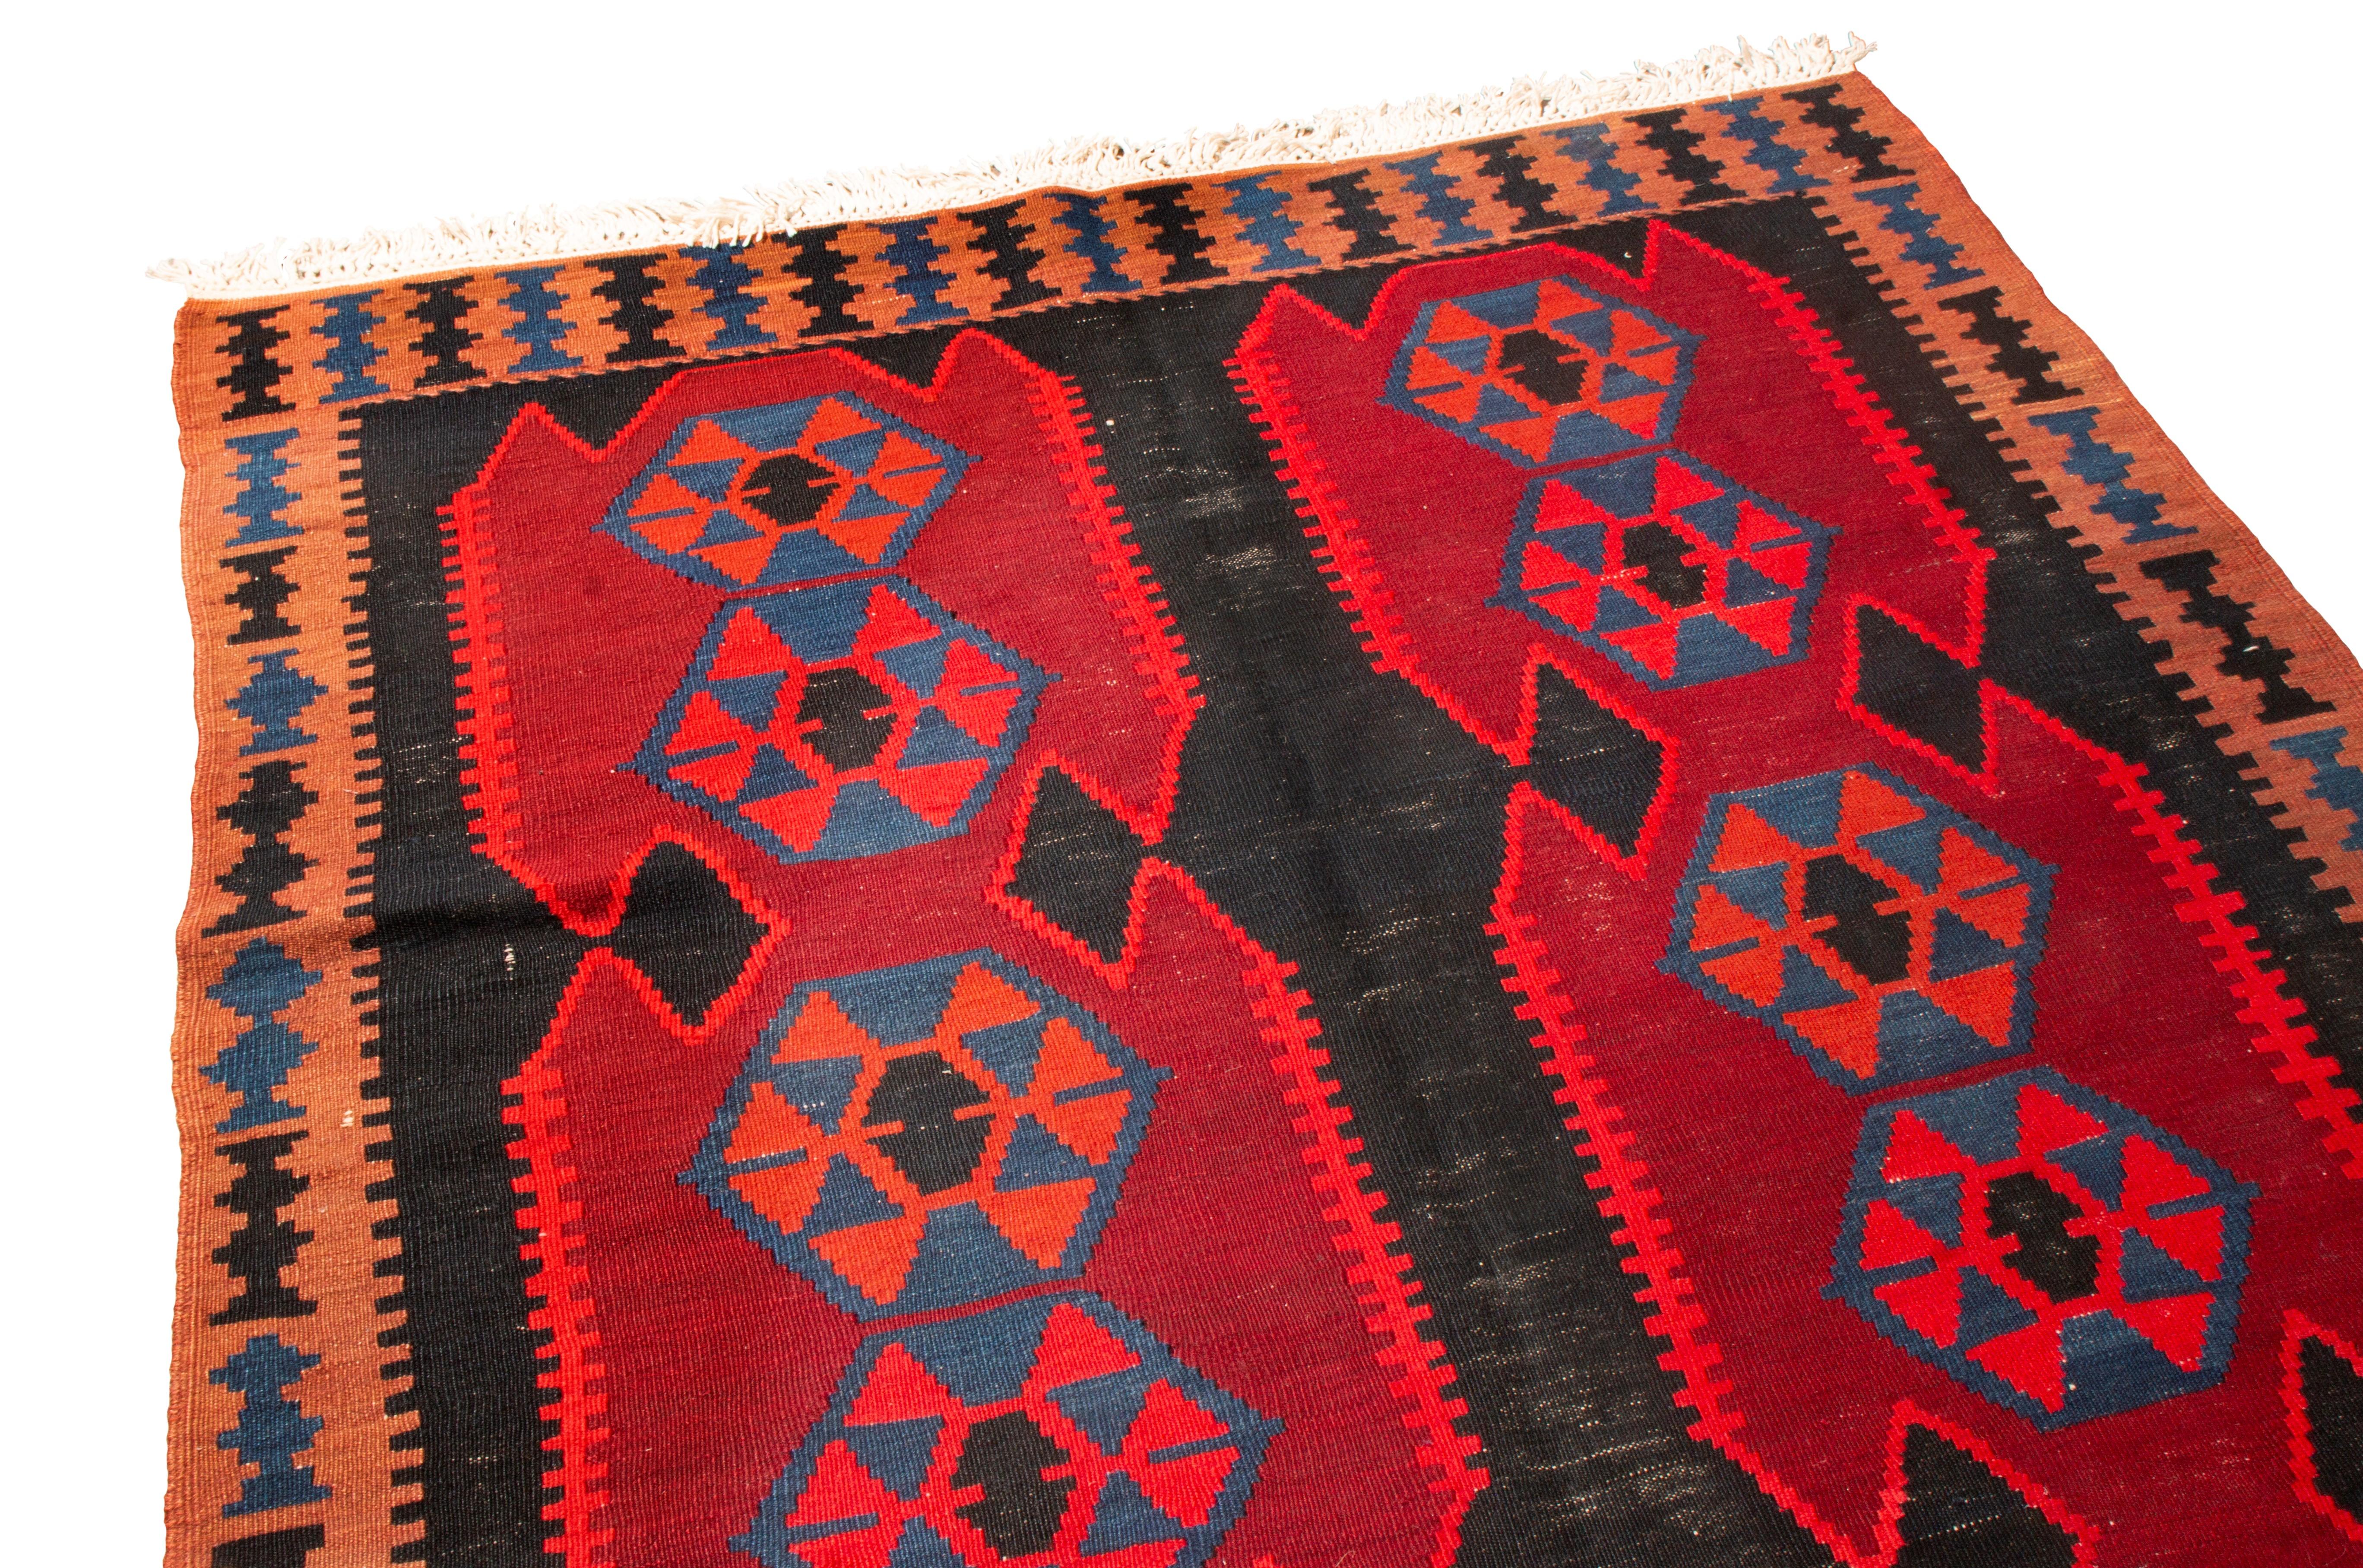 Originating from Persia in 1920, this antique Persian kilim rug from Rug & Kilim embodies the Ghazvin (Qazvin) field design, with lesser-known geometric scorpion symbols throughout the field design to promote awareness and ward off evil. As Ghazvin